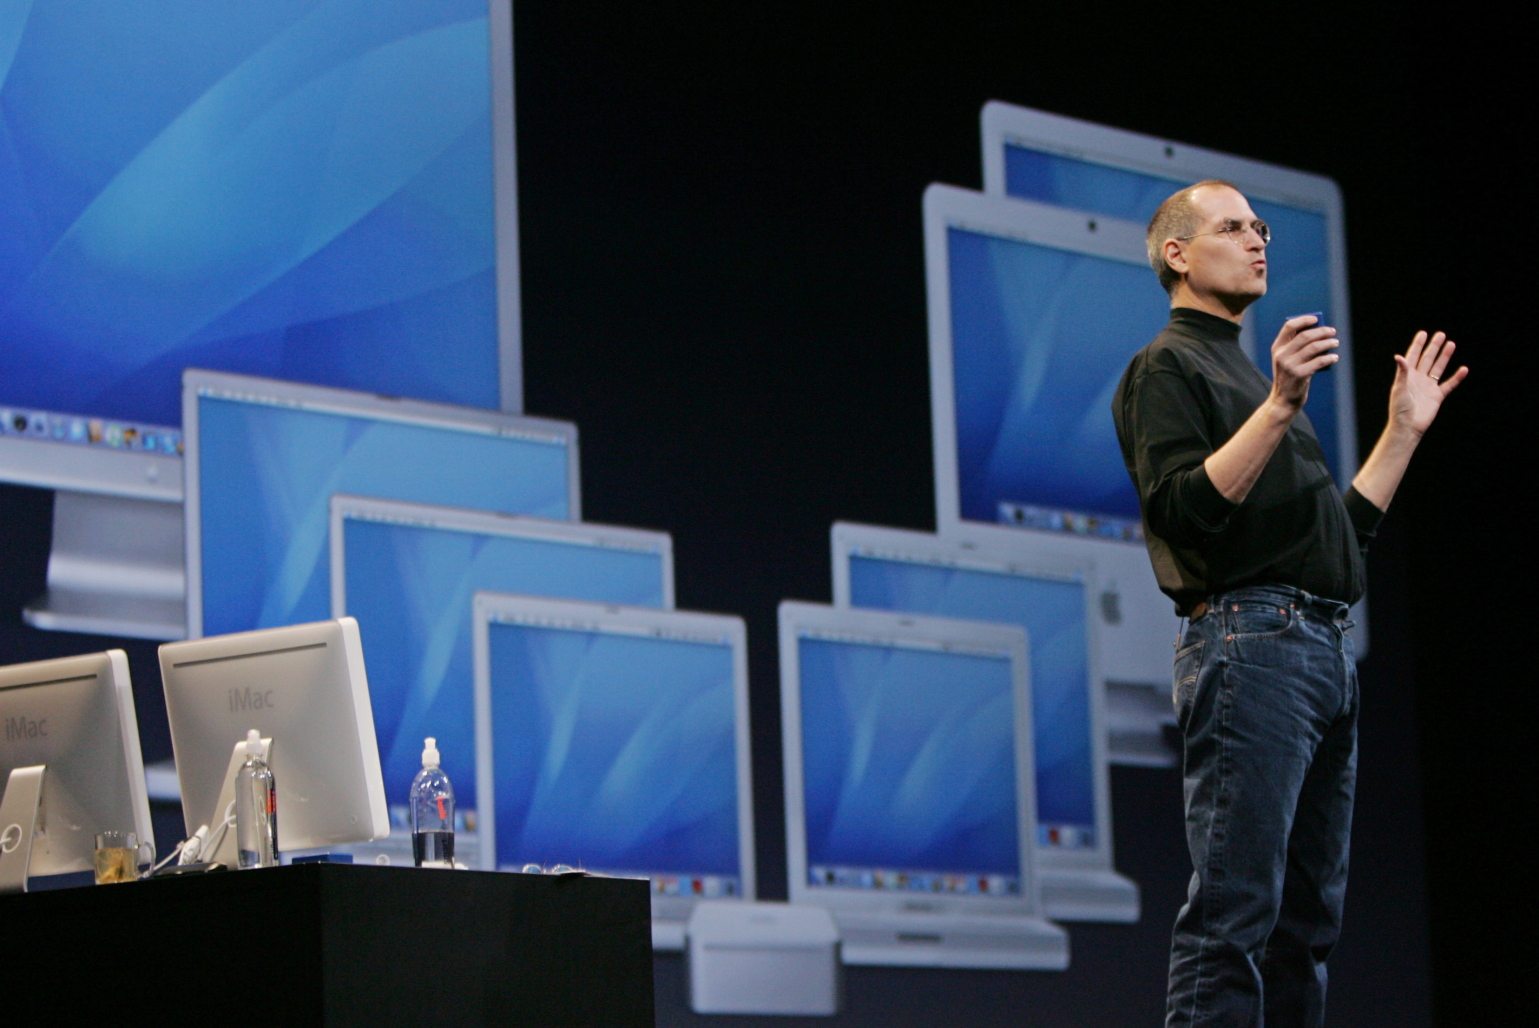 Former Apple CEO Steve Jobs speaks at the MacWorld conference in San Francisco in 2006.